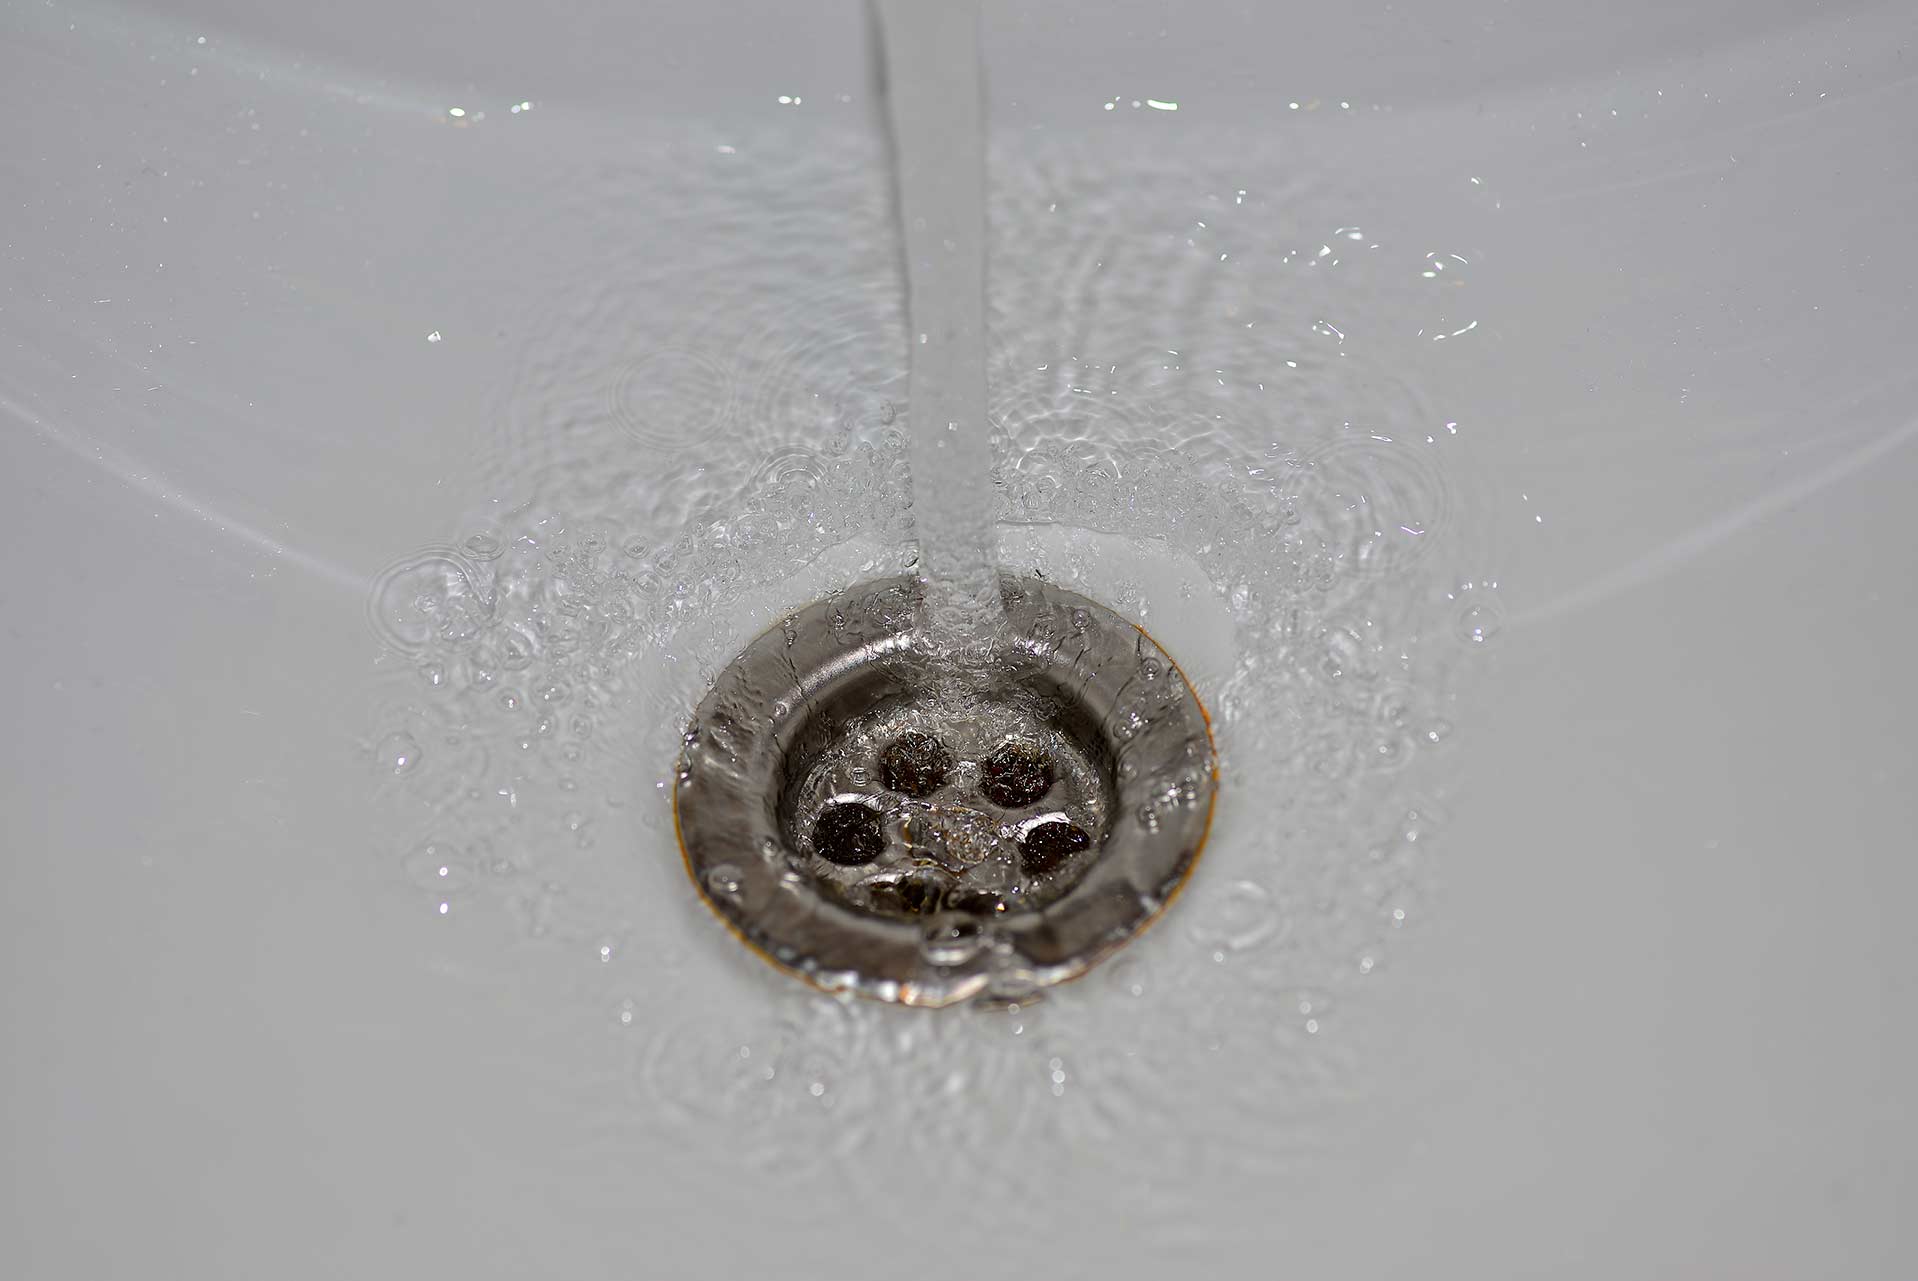 A2B Drains provides services to unblock blocked sinks and drains for properties in Neston.